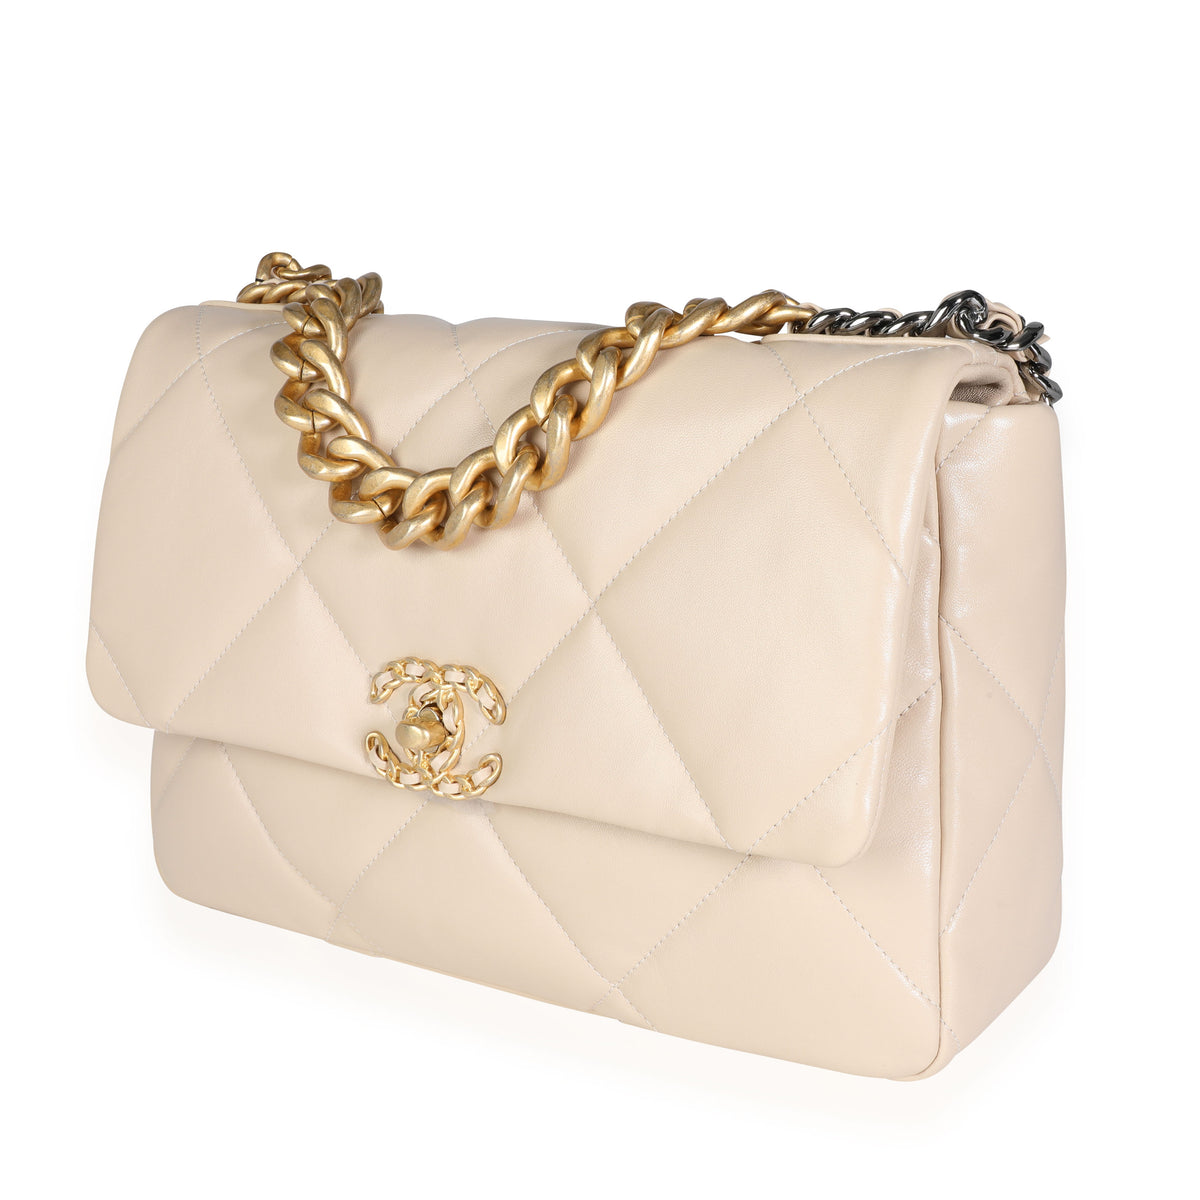 Chanel Beige Quilted Lambskin Large Chanel 19 Bag, myGemma